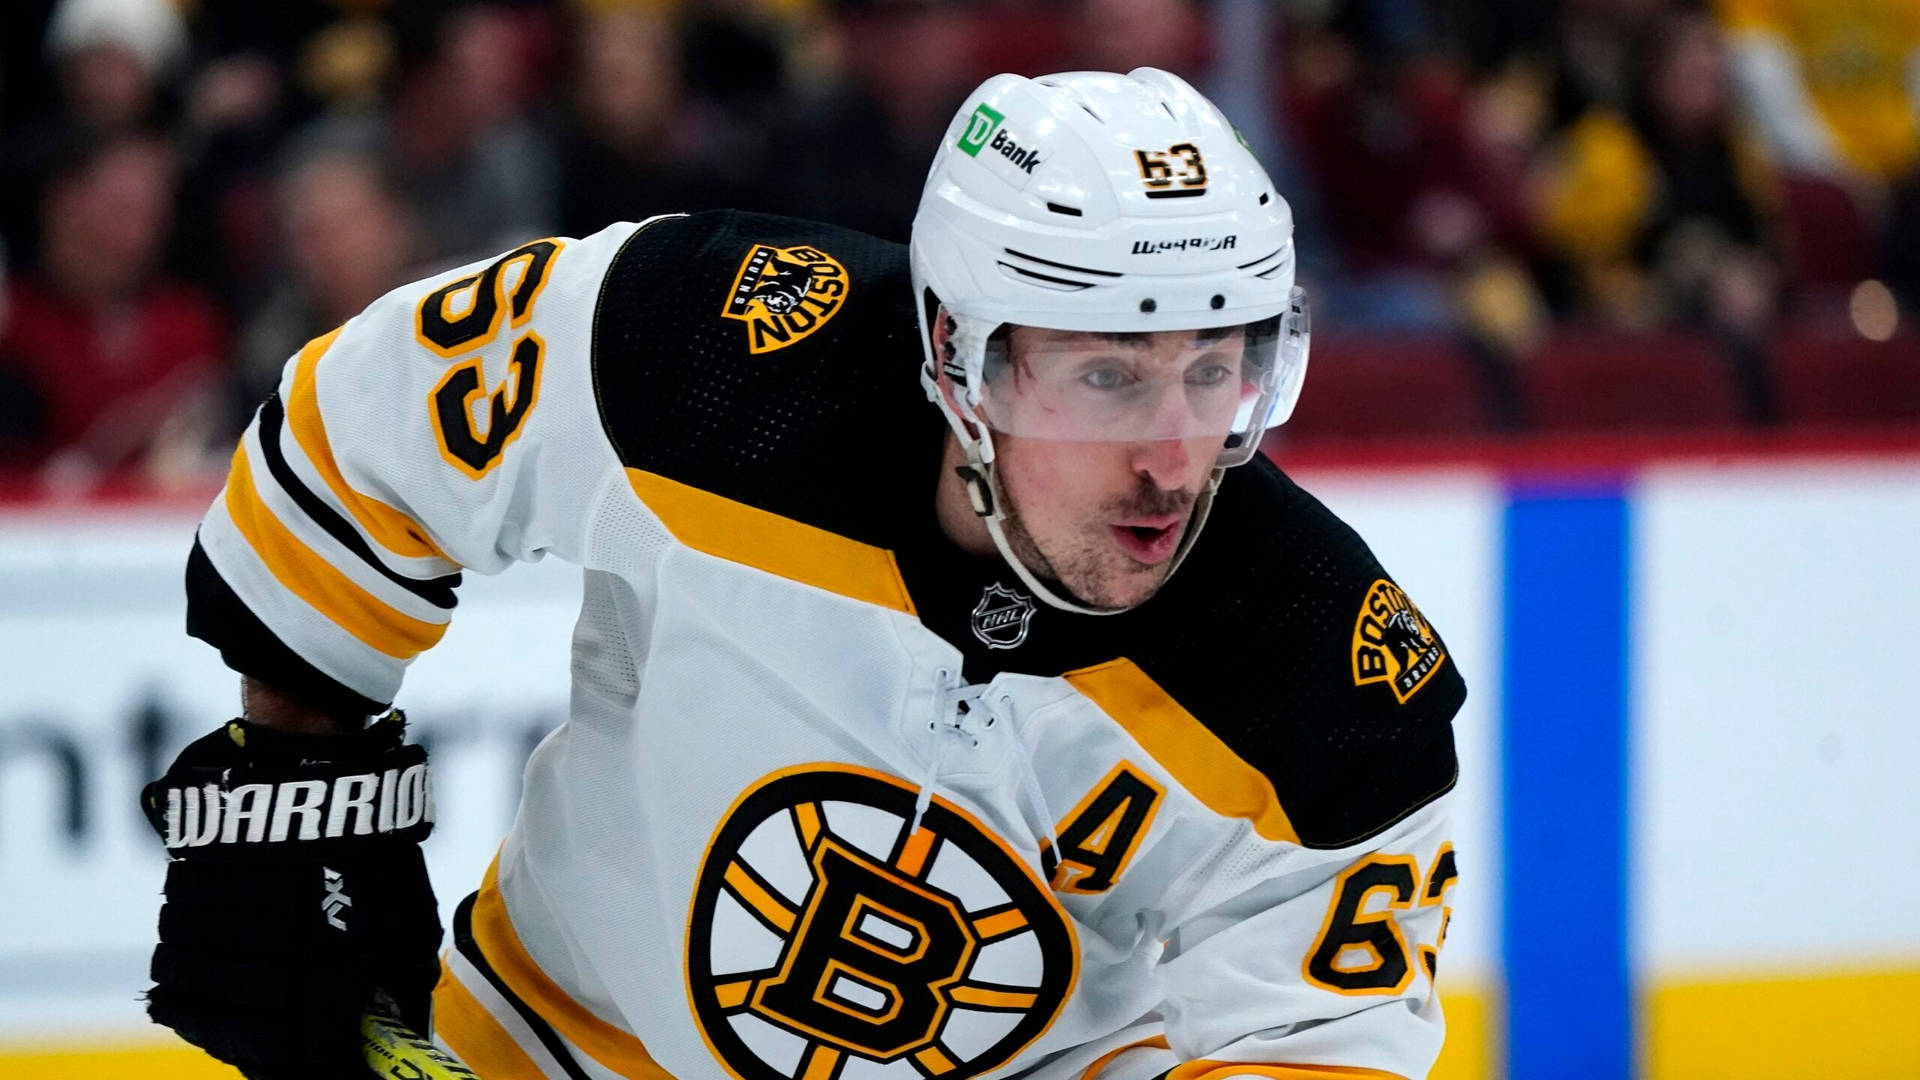 Brad Marchand Of The Boston Bruins In Action With White Uniform.